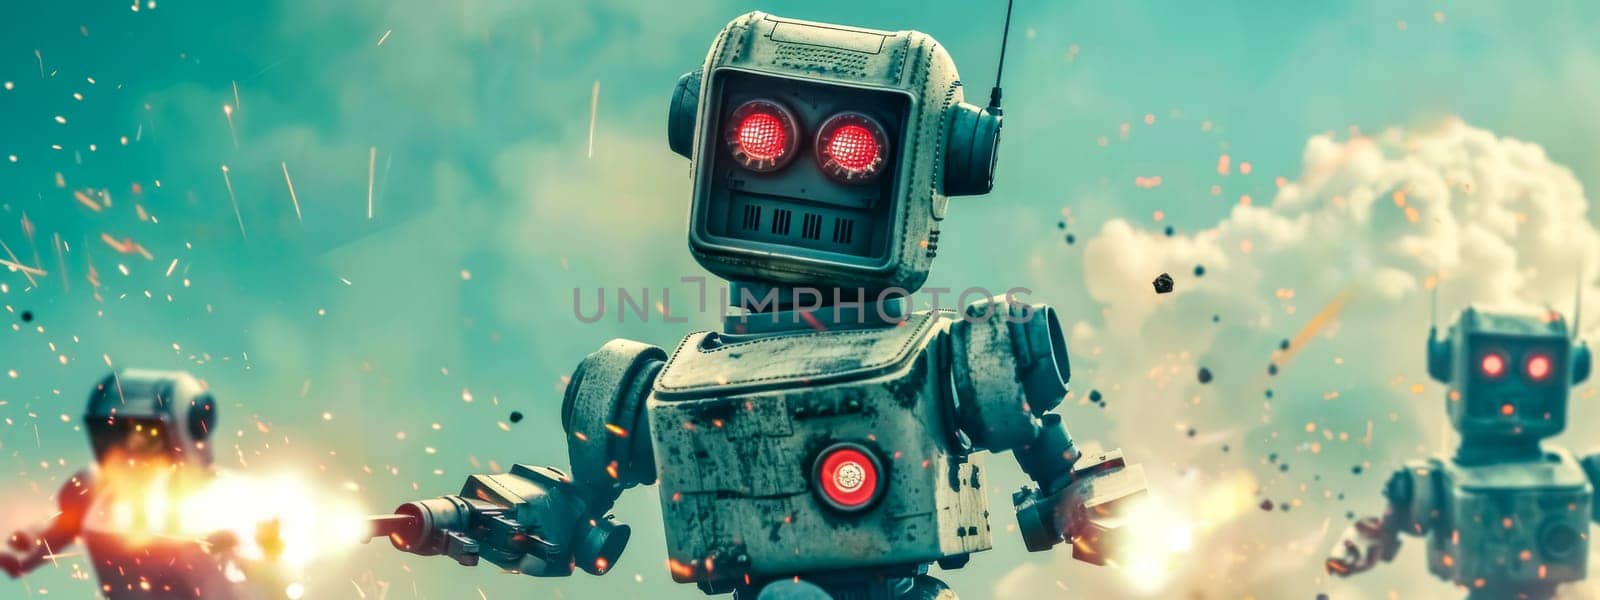 Captivating display of vintage retro robots in action with glowing eyes and sparking duels, evoking nostalgic childhood memories of playful robotic battles in a futuristic sci-fi fantasy world